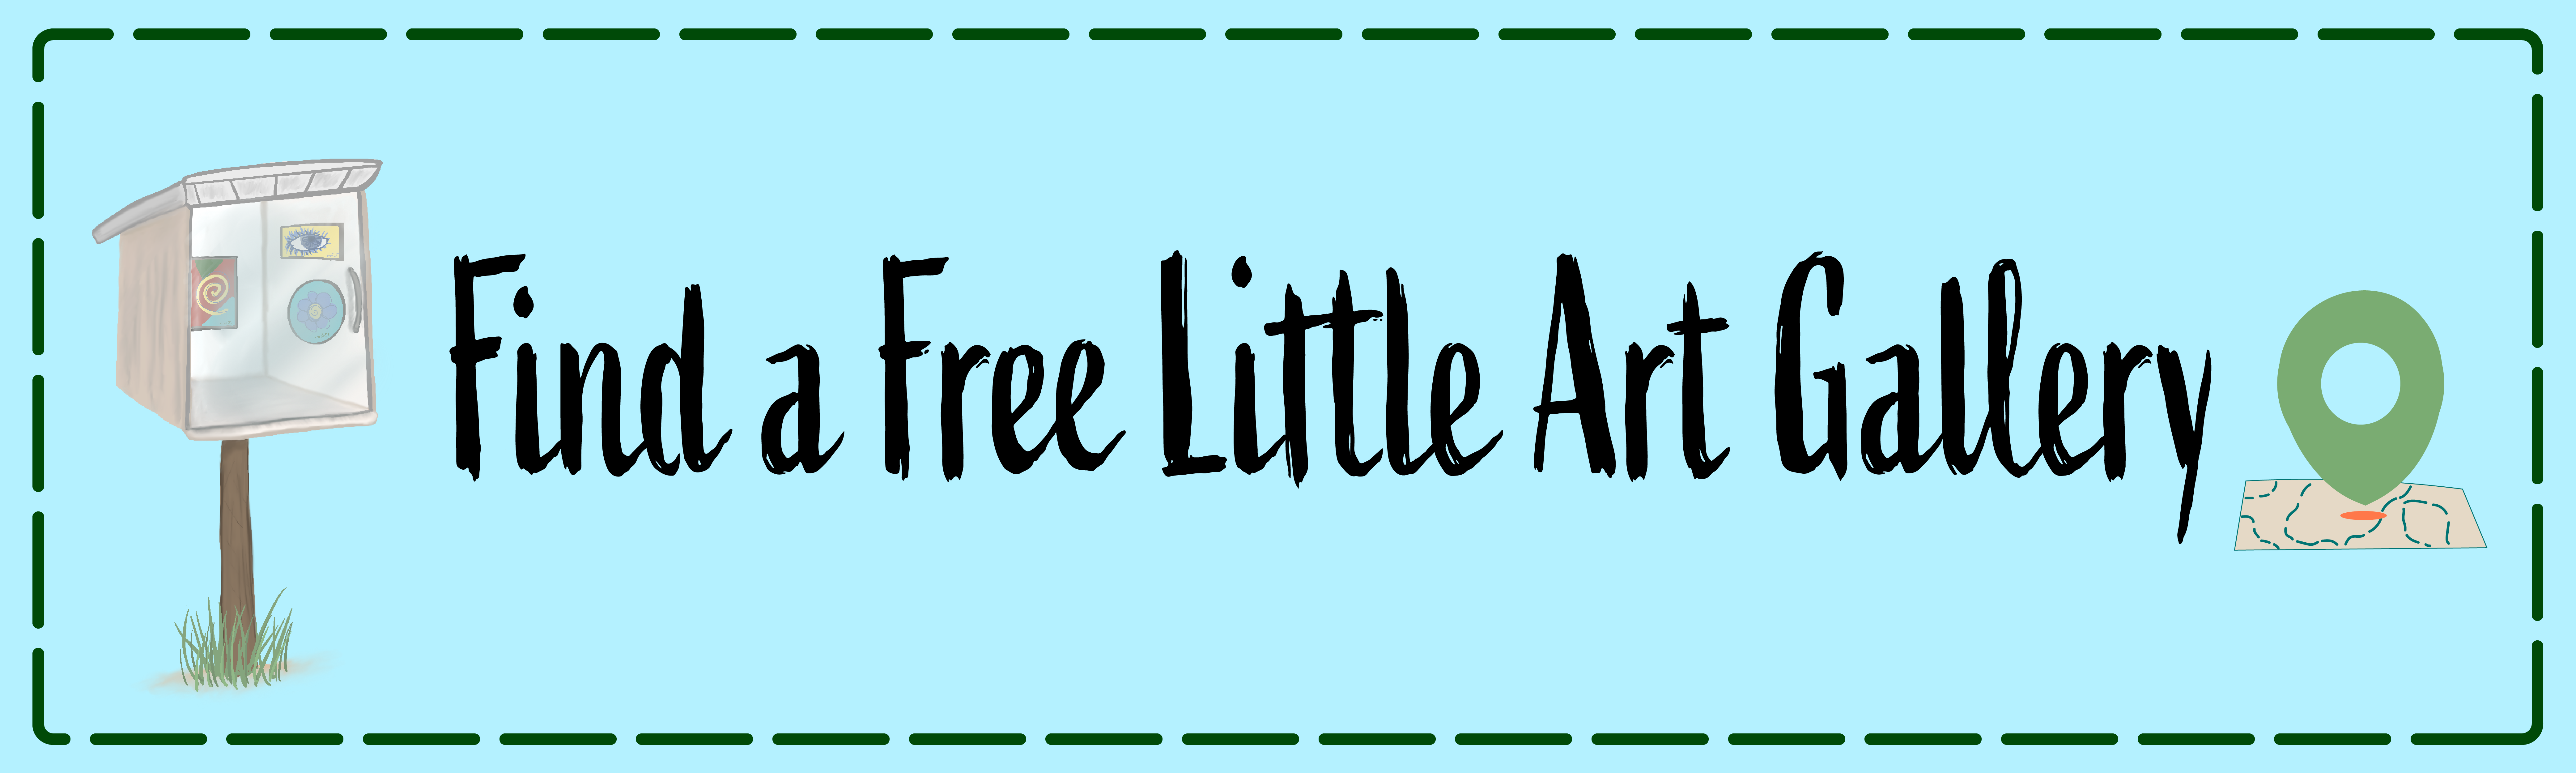 Find a Free Little Art Gallery header image with logos on either side.